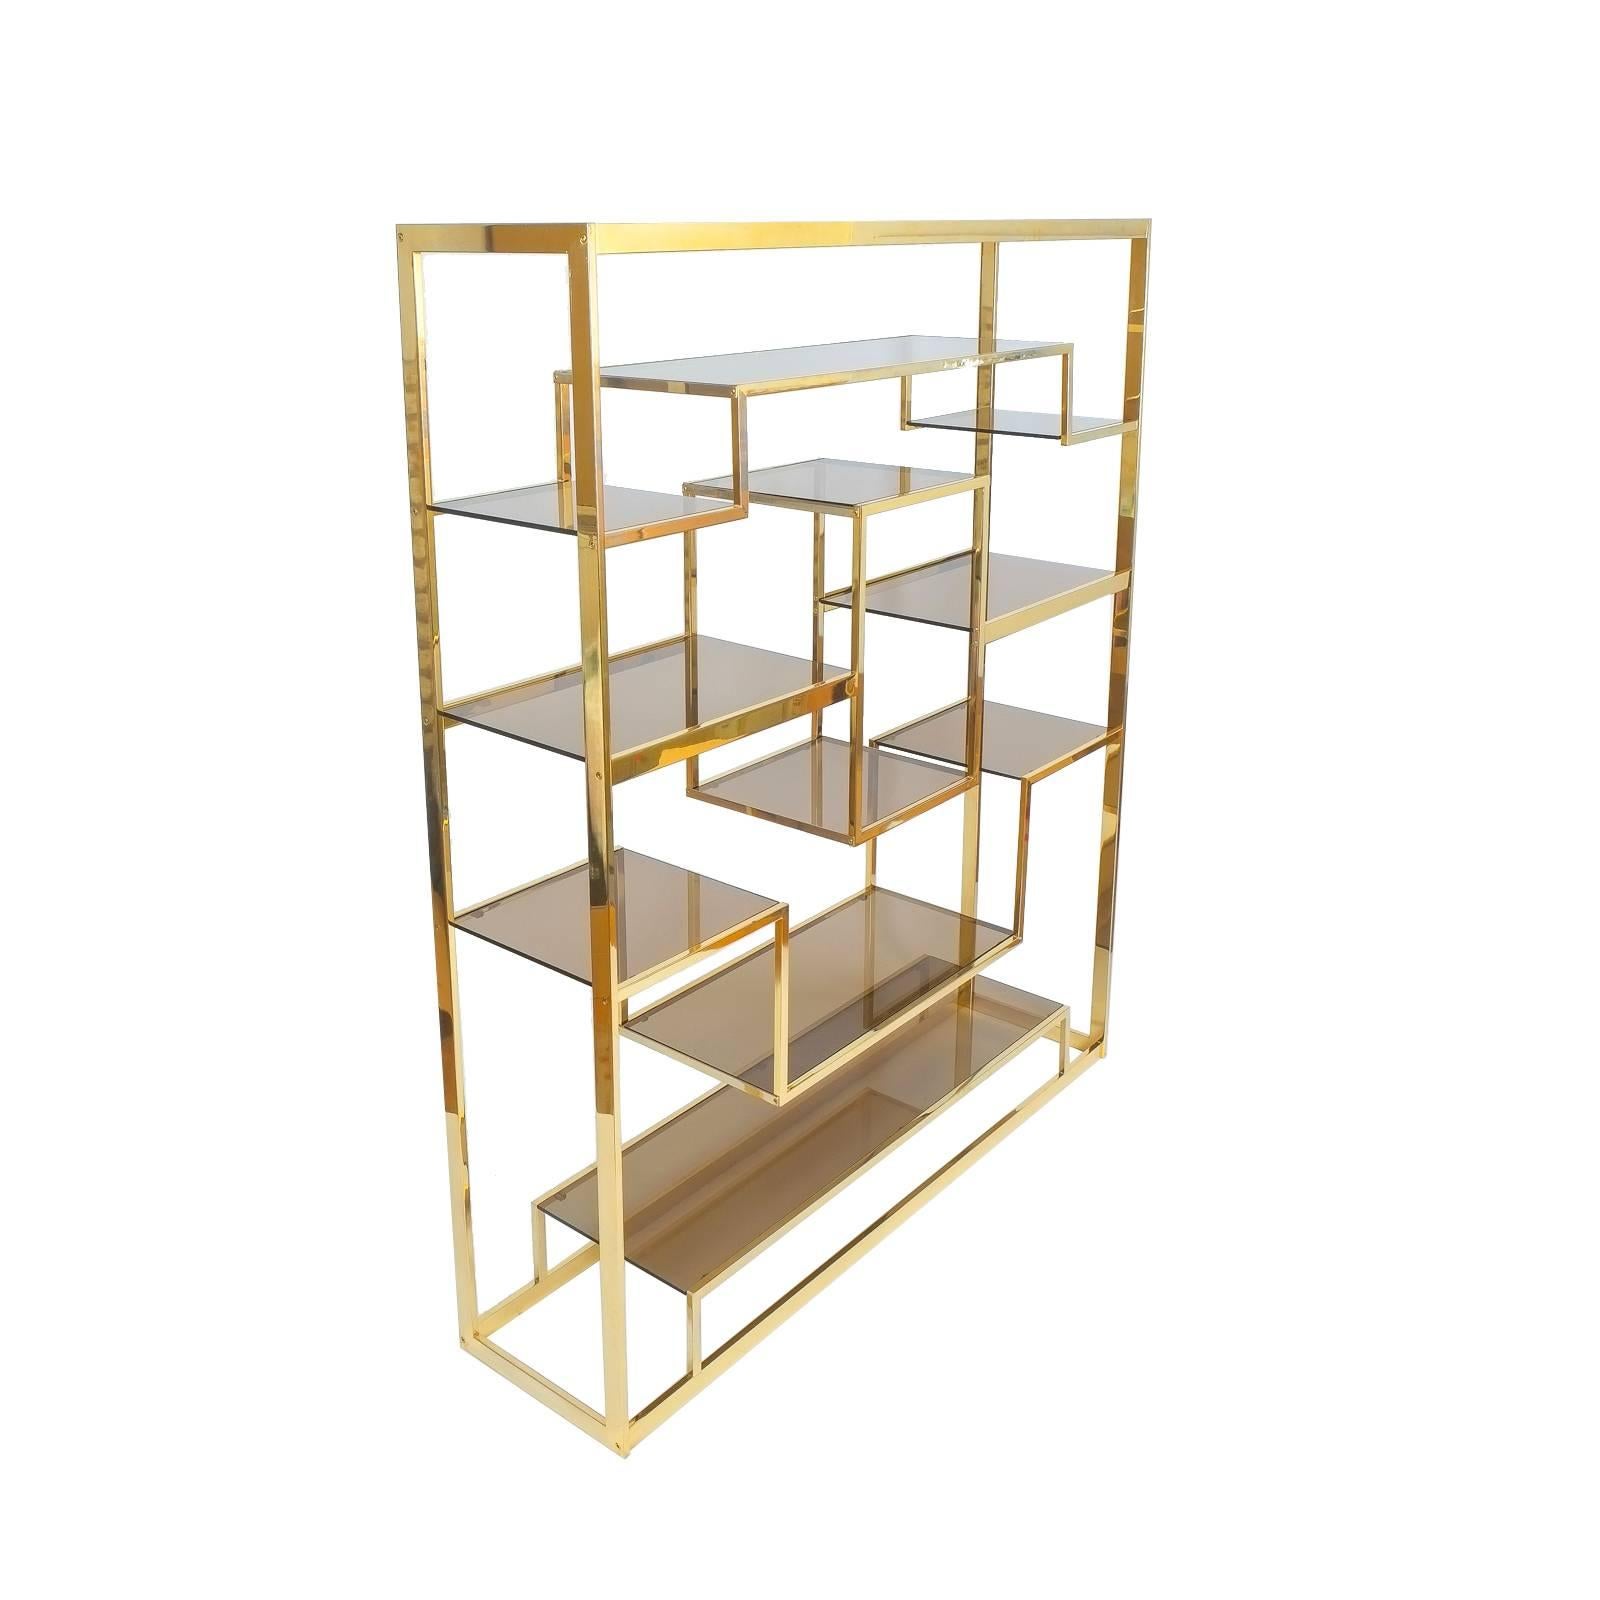 Dyed Romeo Rega Etagere Brass and Glass Room Divider